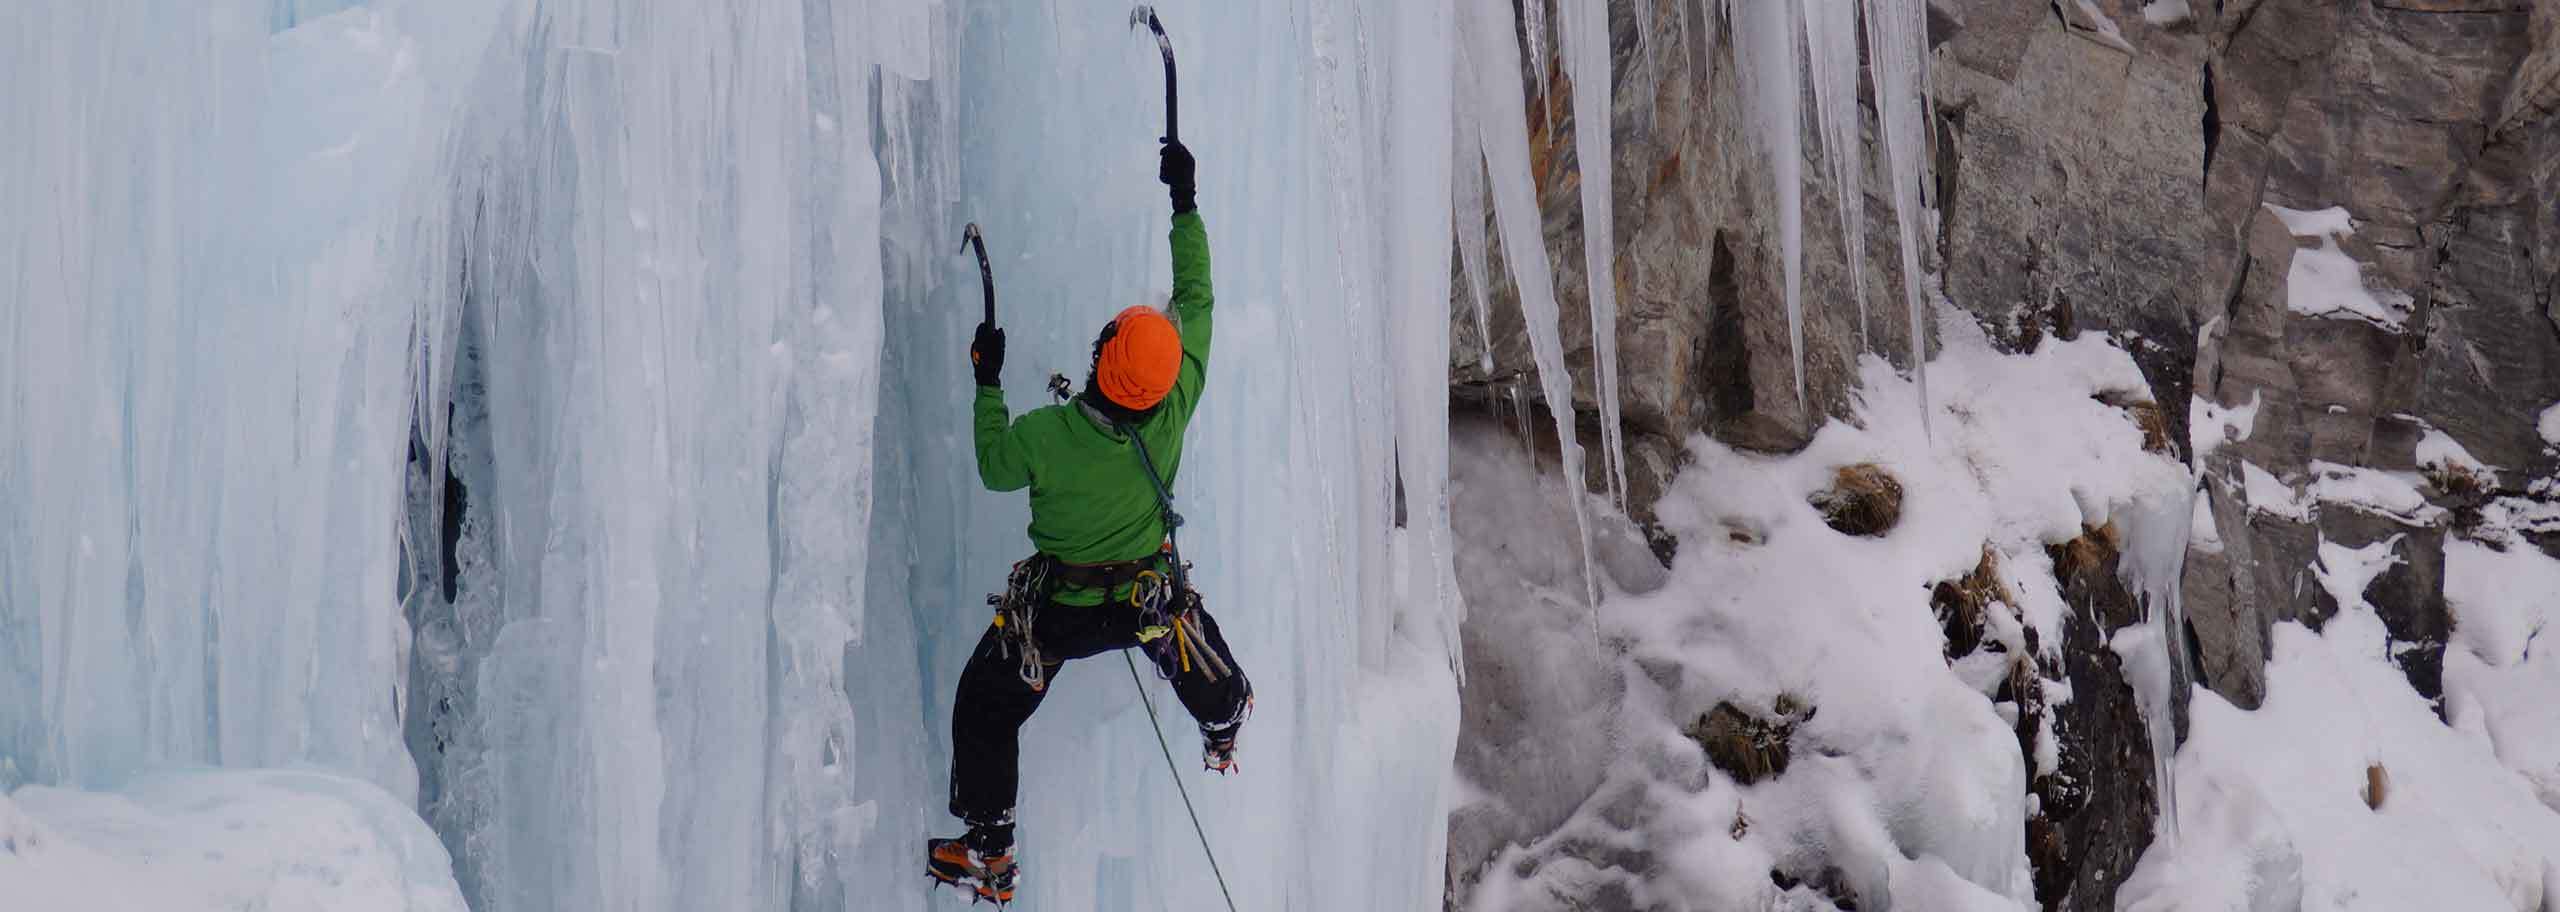 Ice Climbing in Limone Piemonte, Courses & Multi-pitch Routes